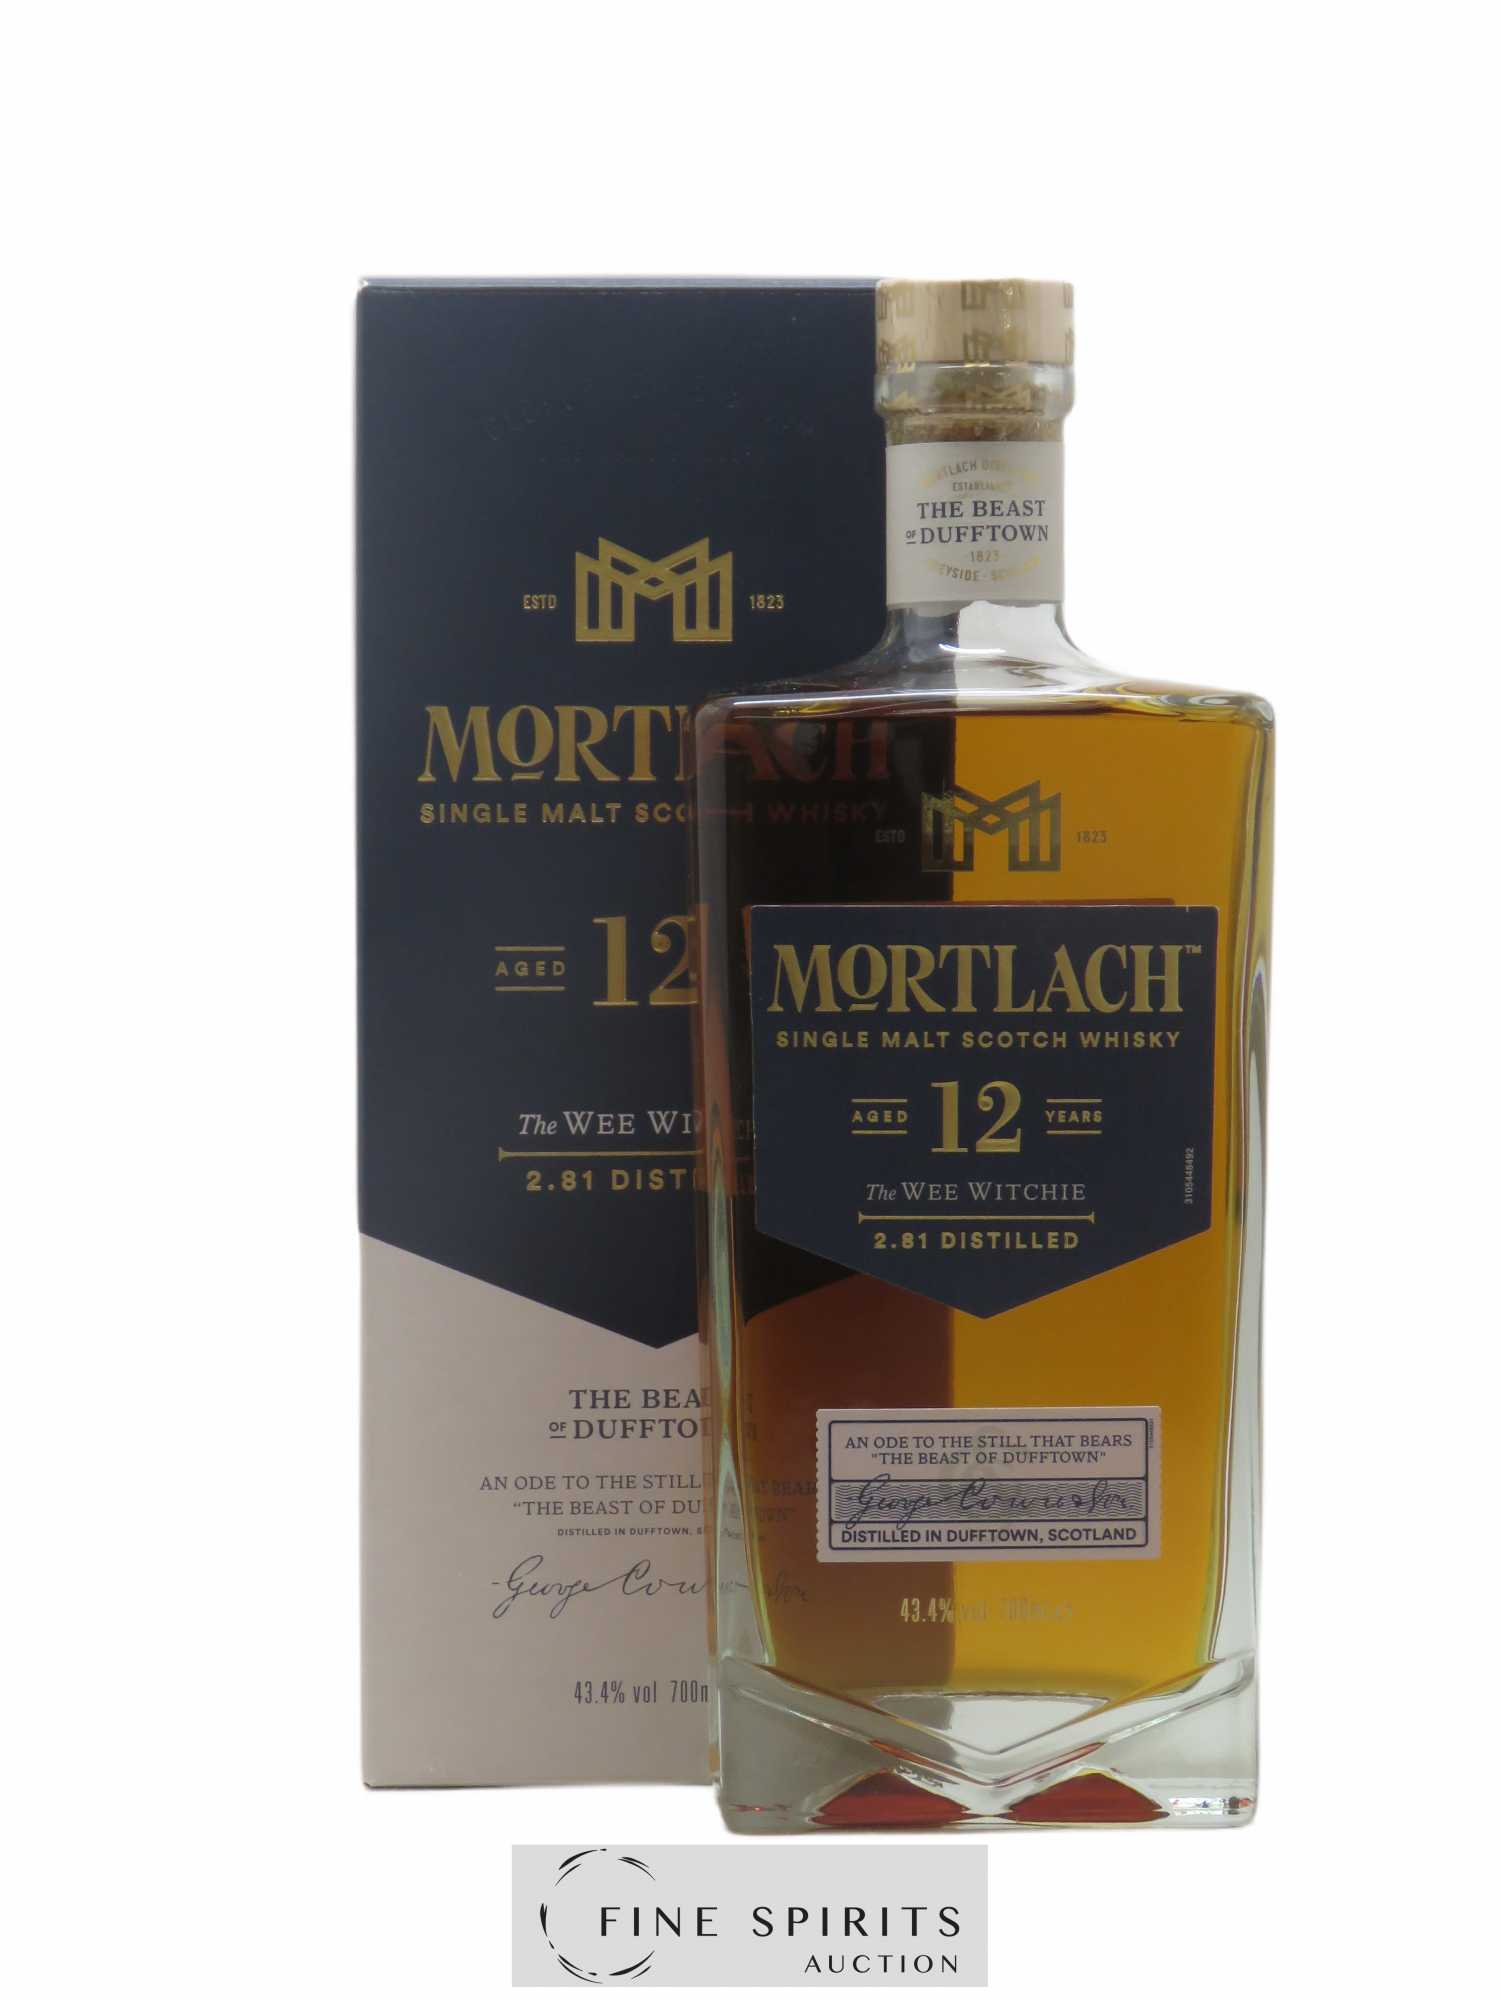 Mortlach 12 years Of. The Wee Witchie 2.81 Distilled 